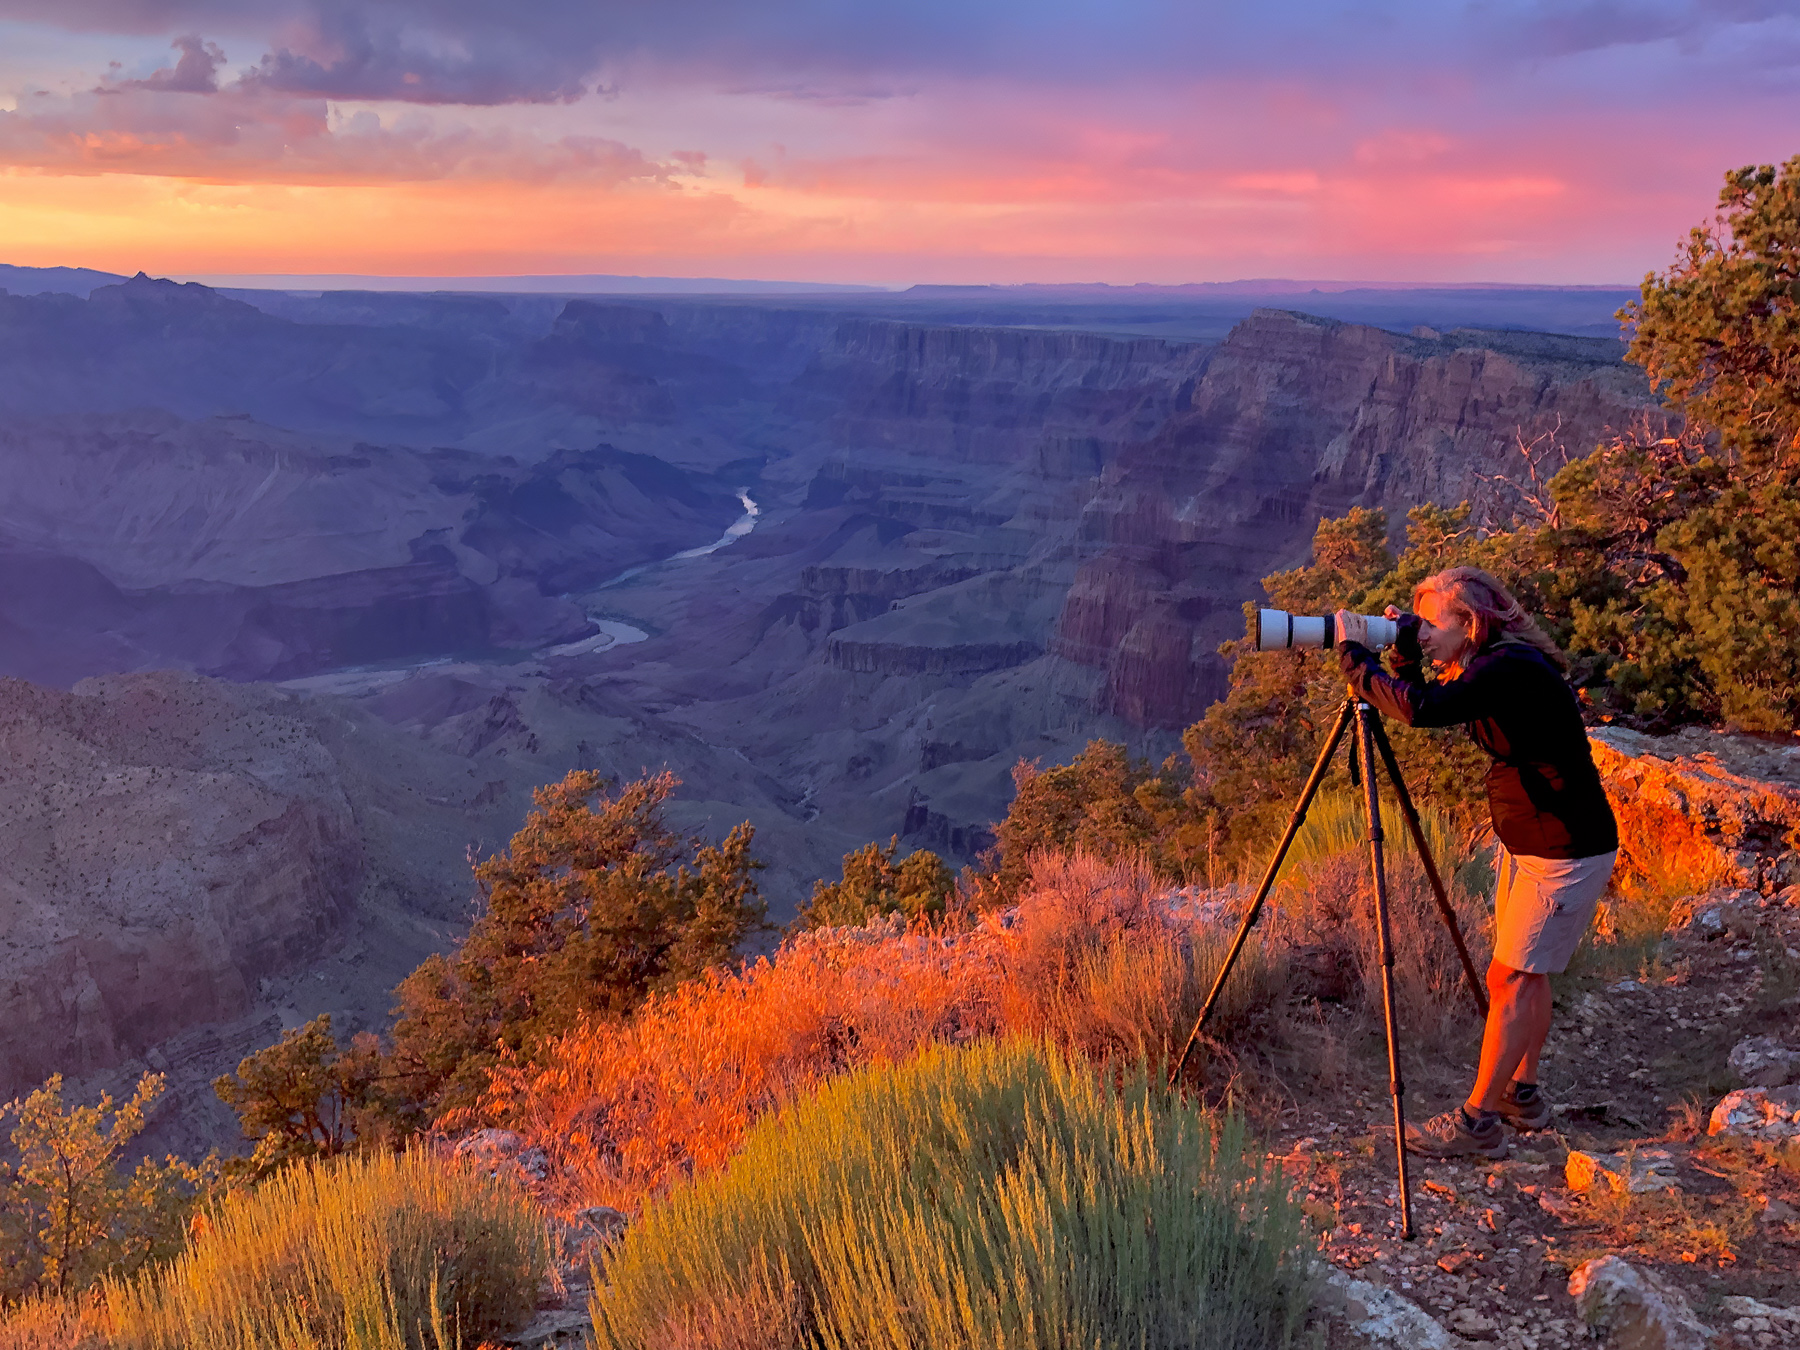 Abstract photographer taking photos at sunset in Grand Canyon